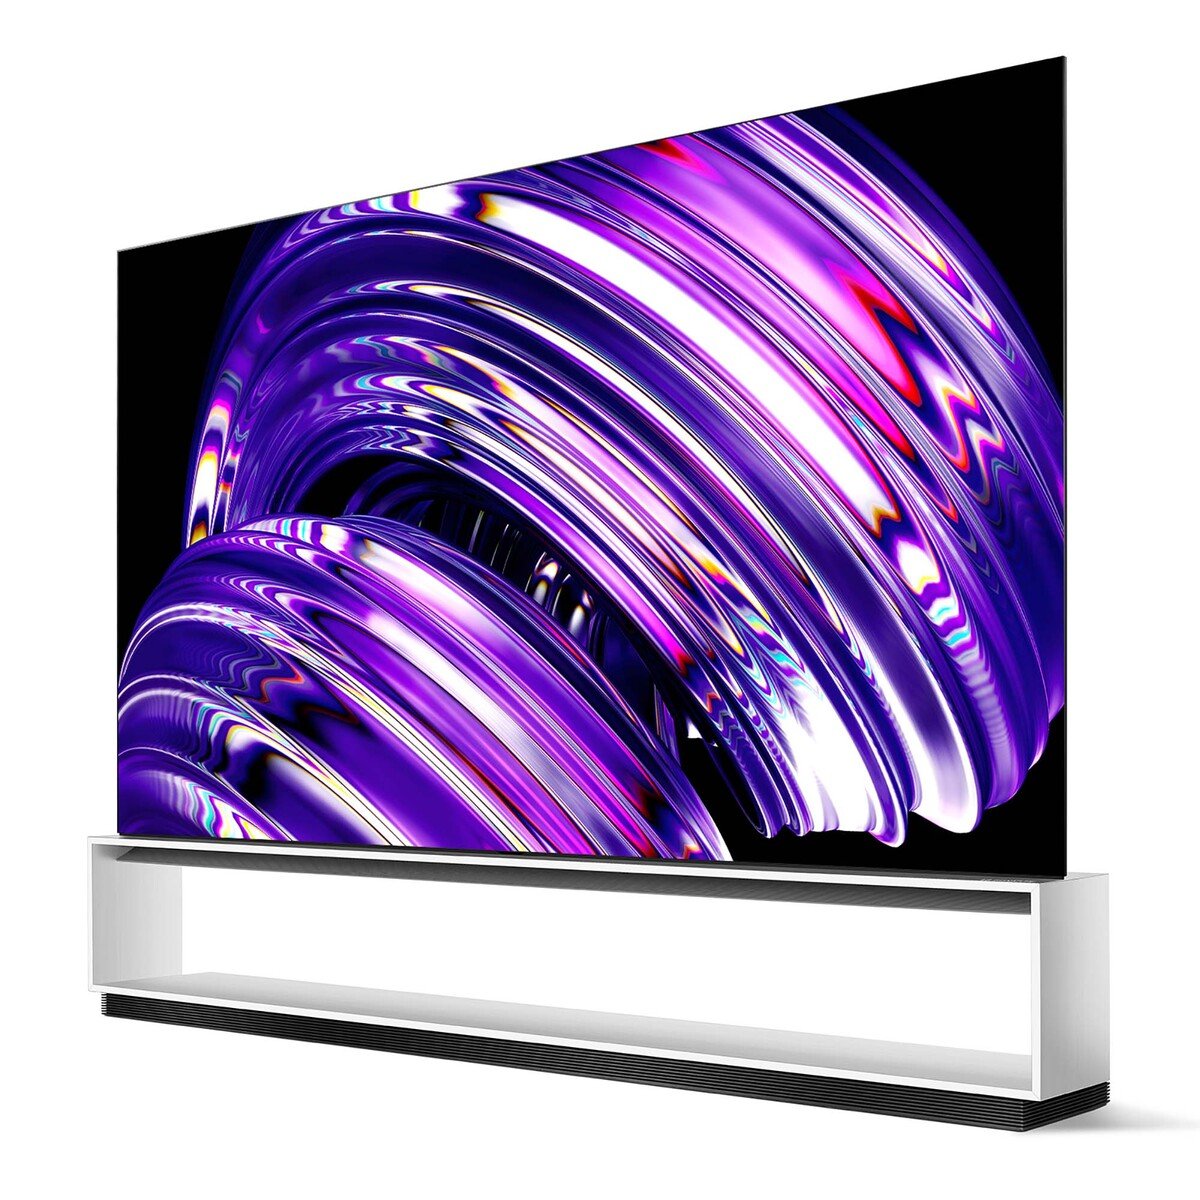 LG OLED TV 88 Inch Z2 series, Cinema Screen Design 4K Cinema HDR webOS22 with ThinQ AI 8K Pixel Dimming (OLED88Z26LA)